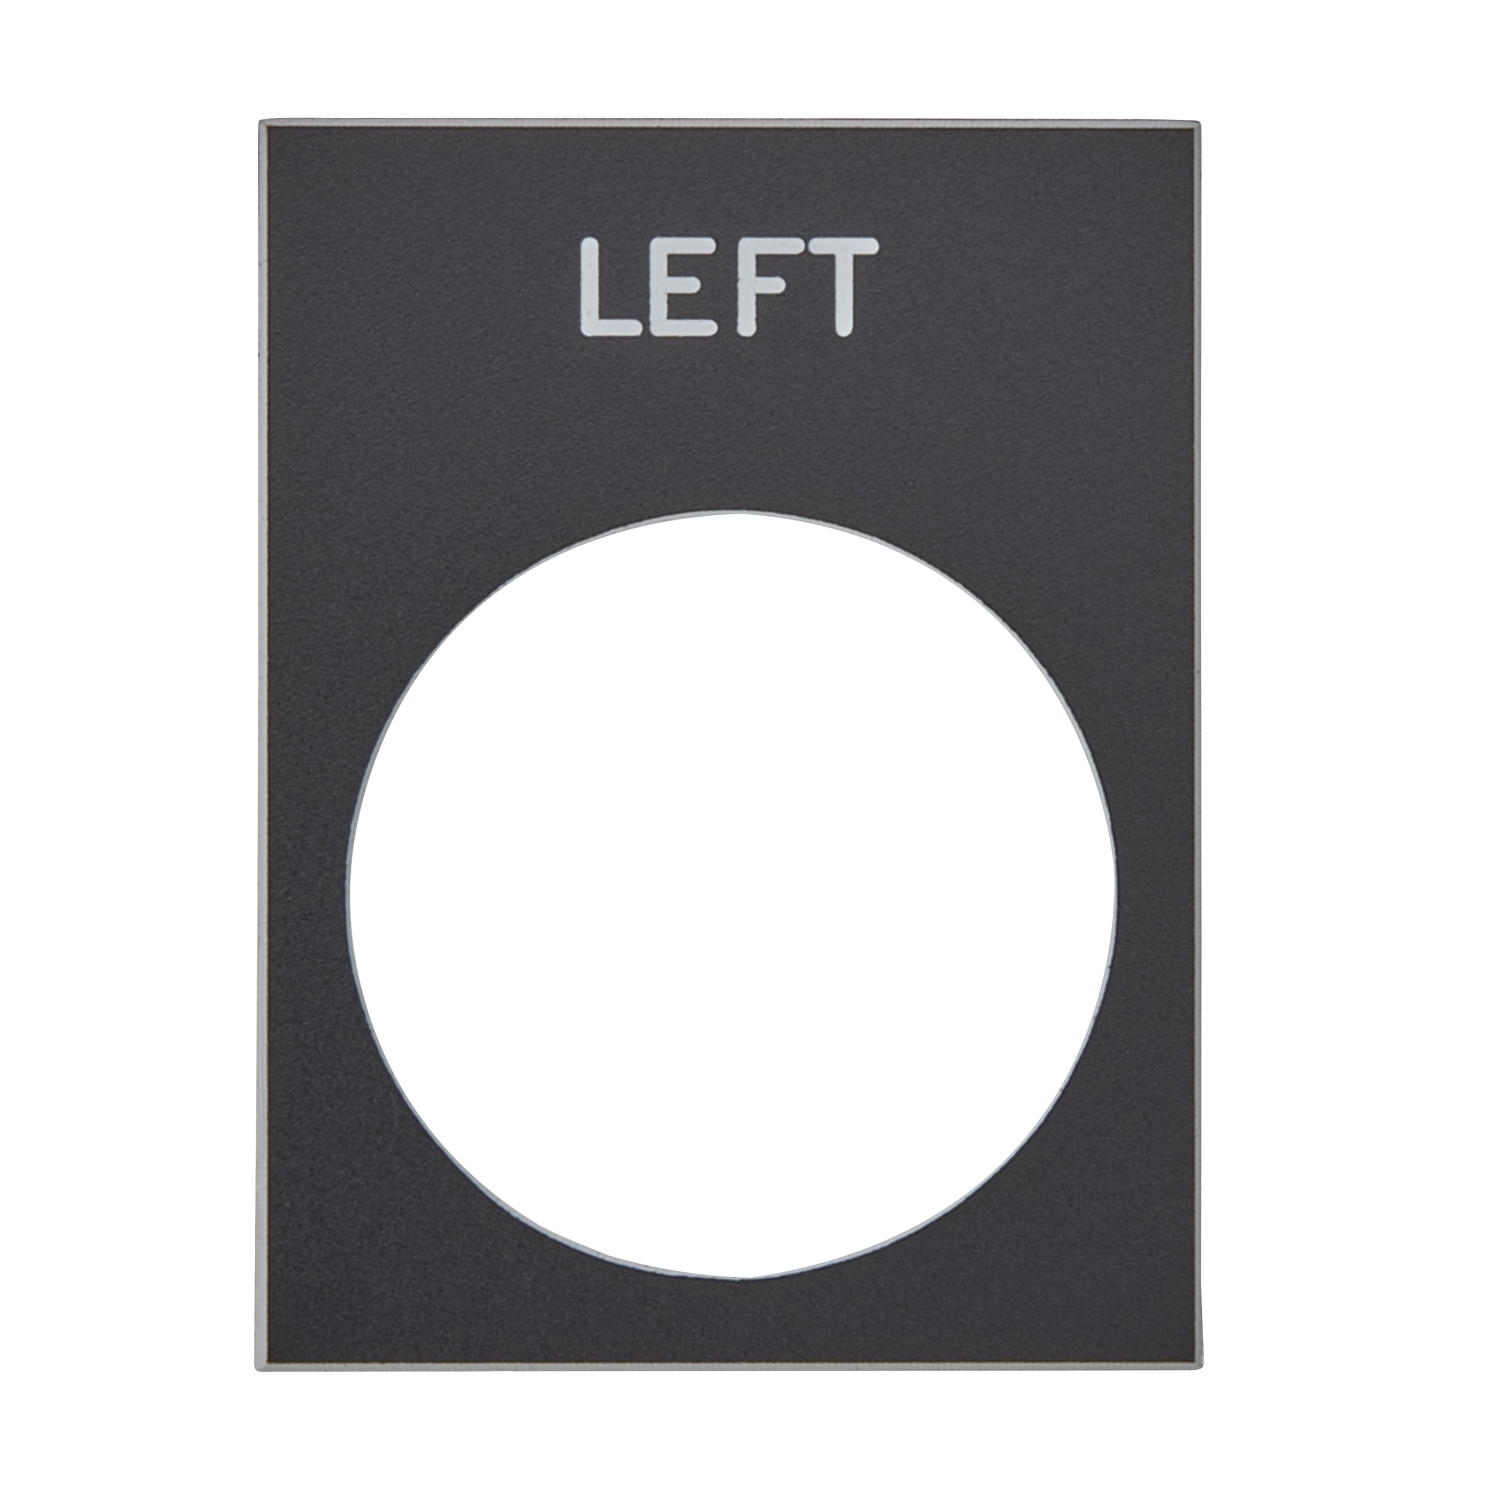 Marked legend, Harmony XAC, nameplate, 30 x 40mm, plastic, black, 22mm push button, white marked LEFT